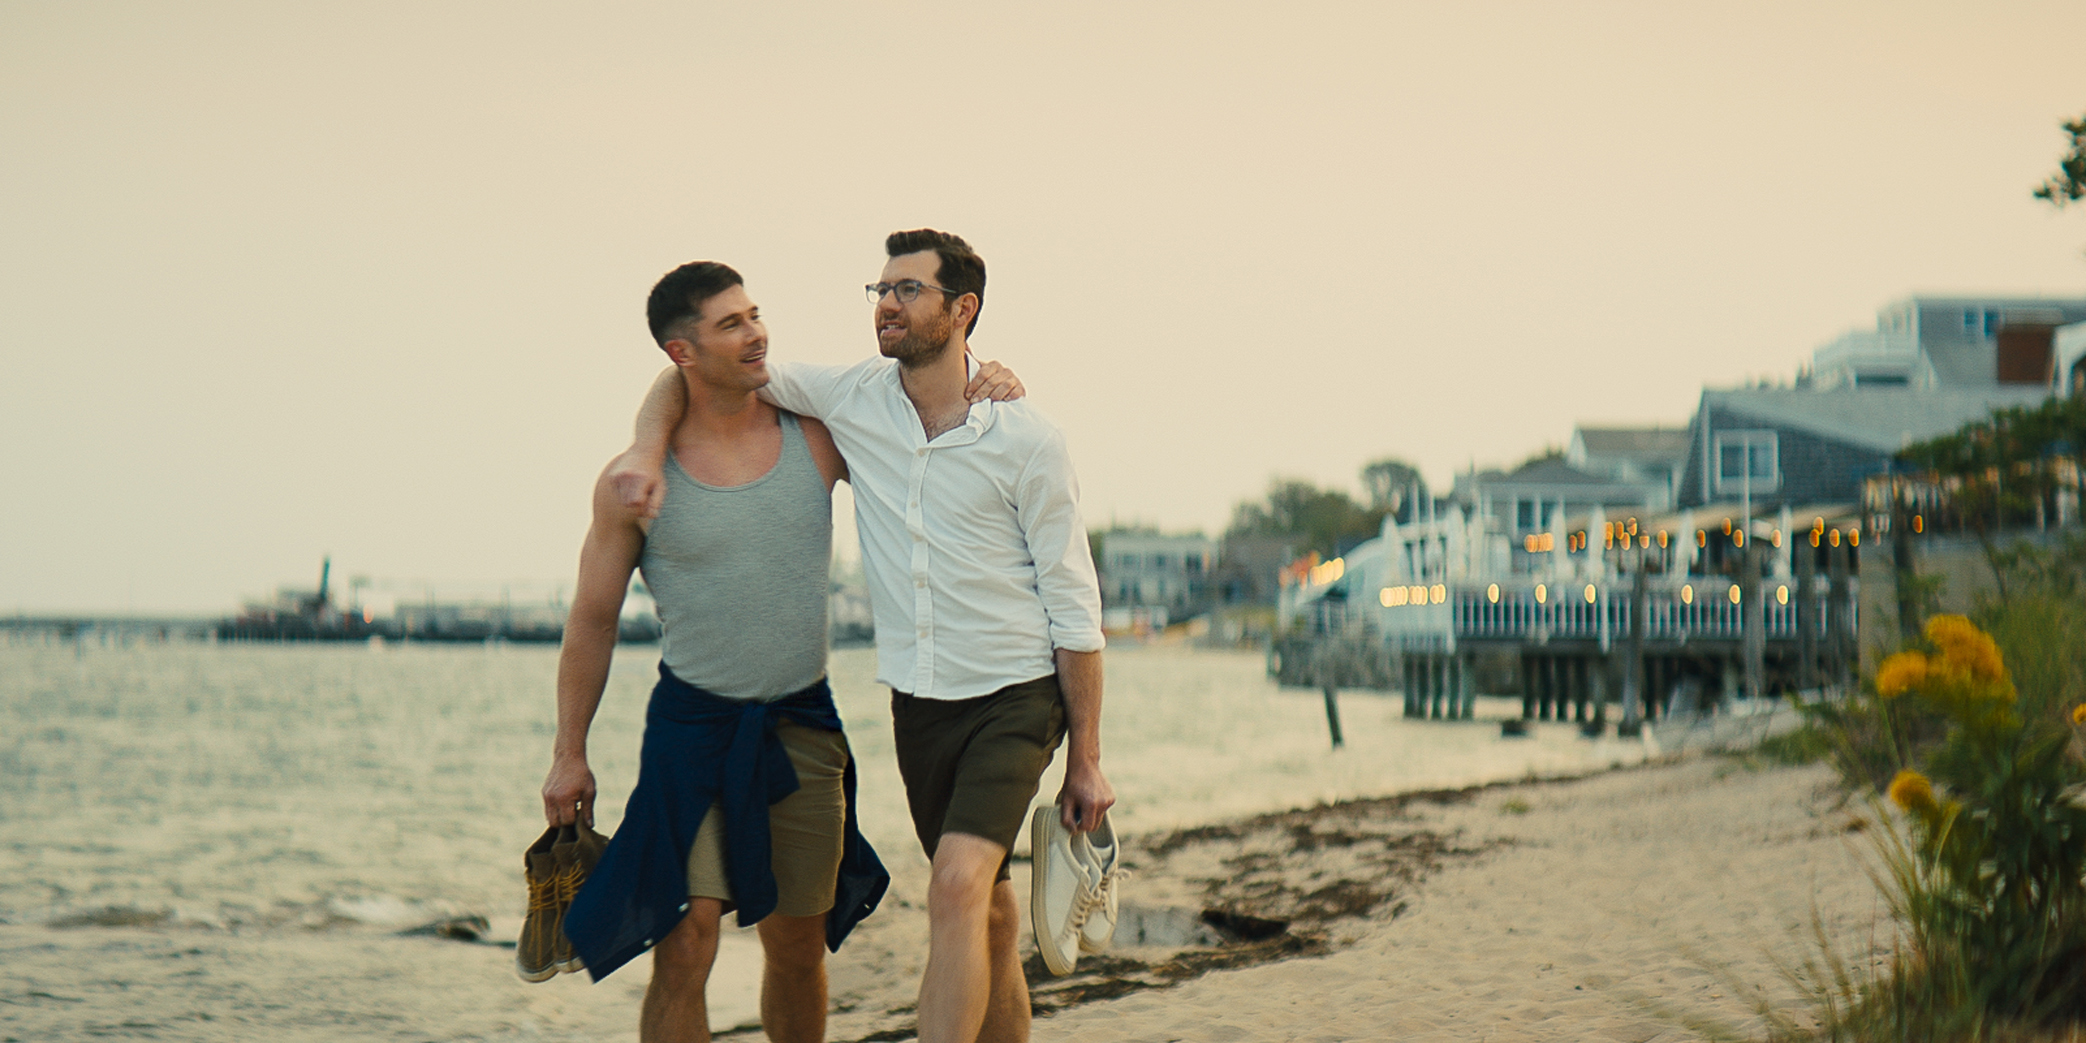 (from left) Aaron (Luke Macfarlane) and Bobby (Billy Eichner) in Bros, co-written, produced and directed by Nicholas Stoller.